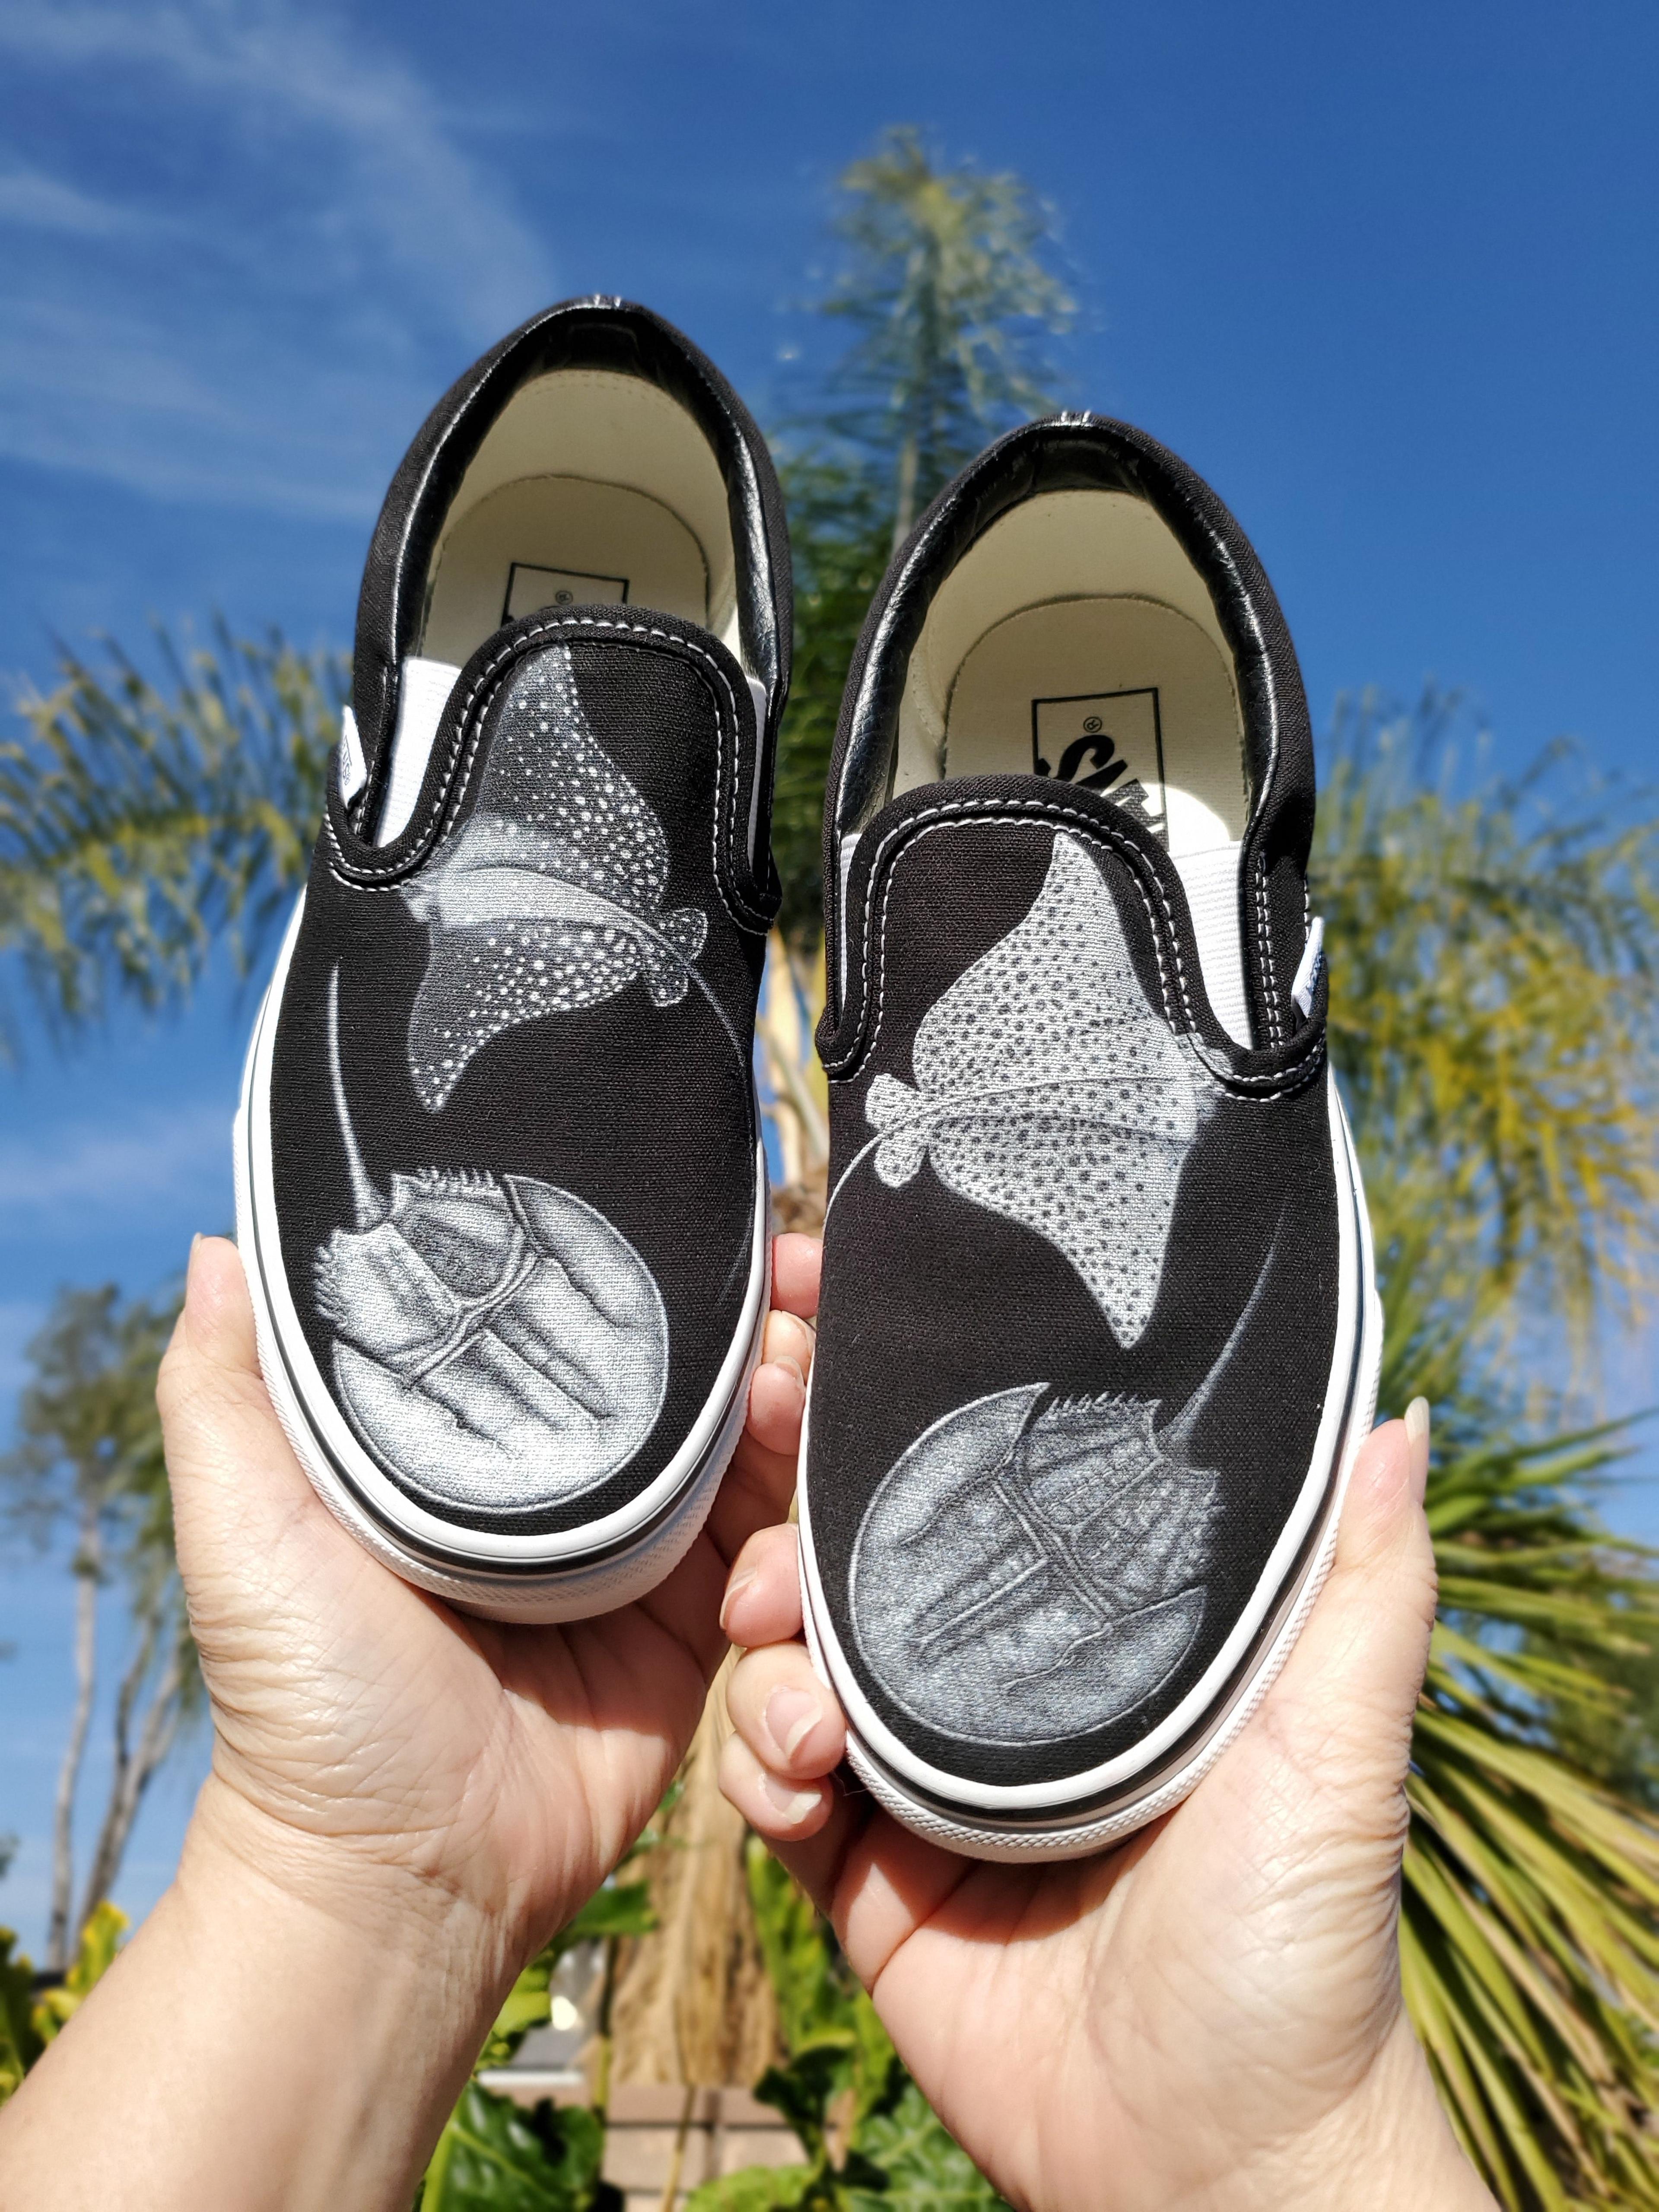 NTWRK - Day and Night Slip Vans Available in Black and White Vans